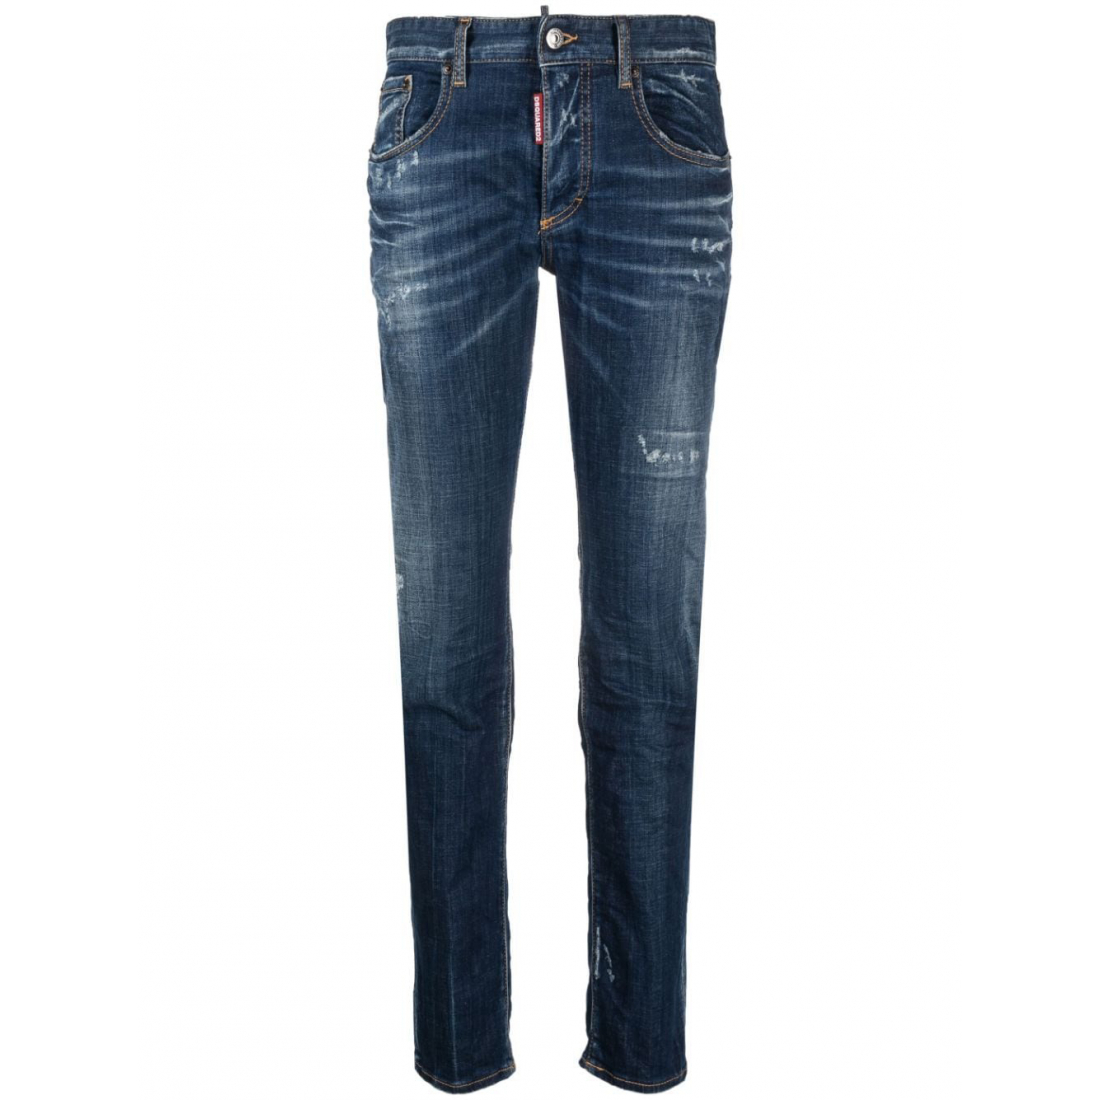 Women's '24/7 Distressed' Jeans